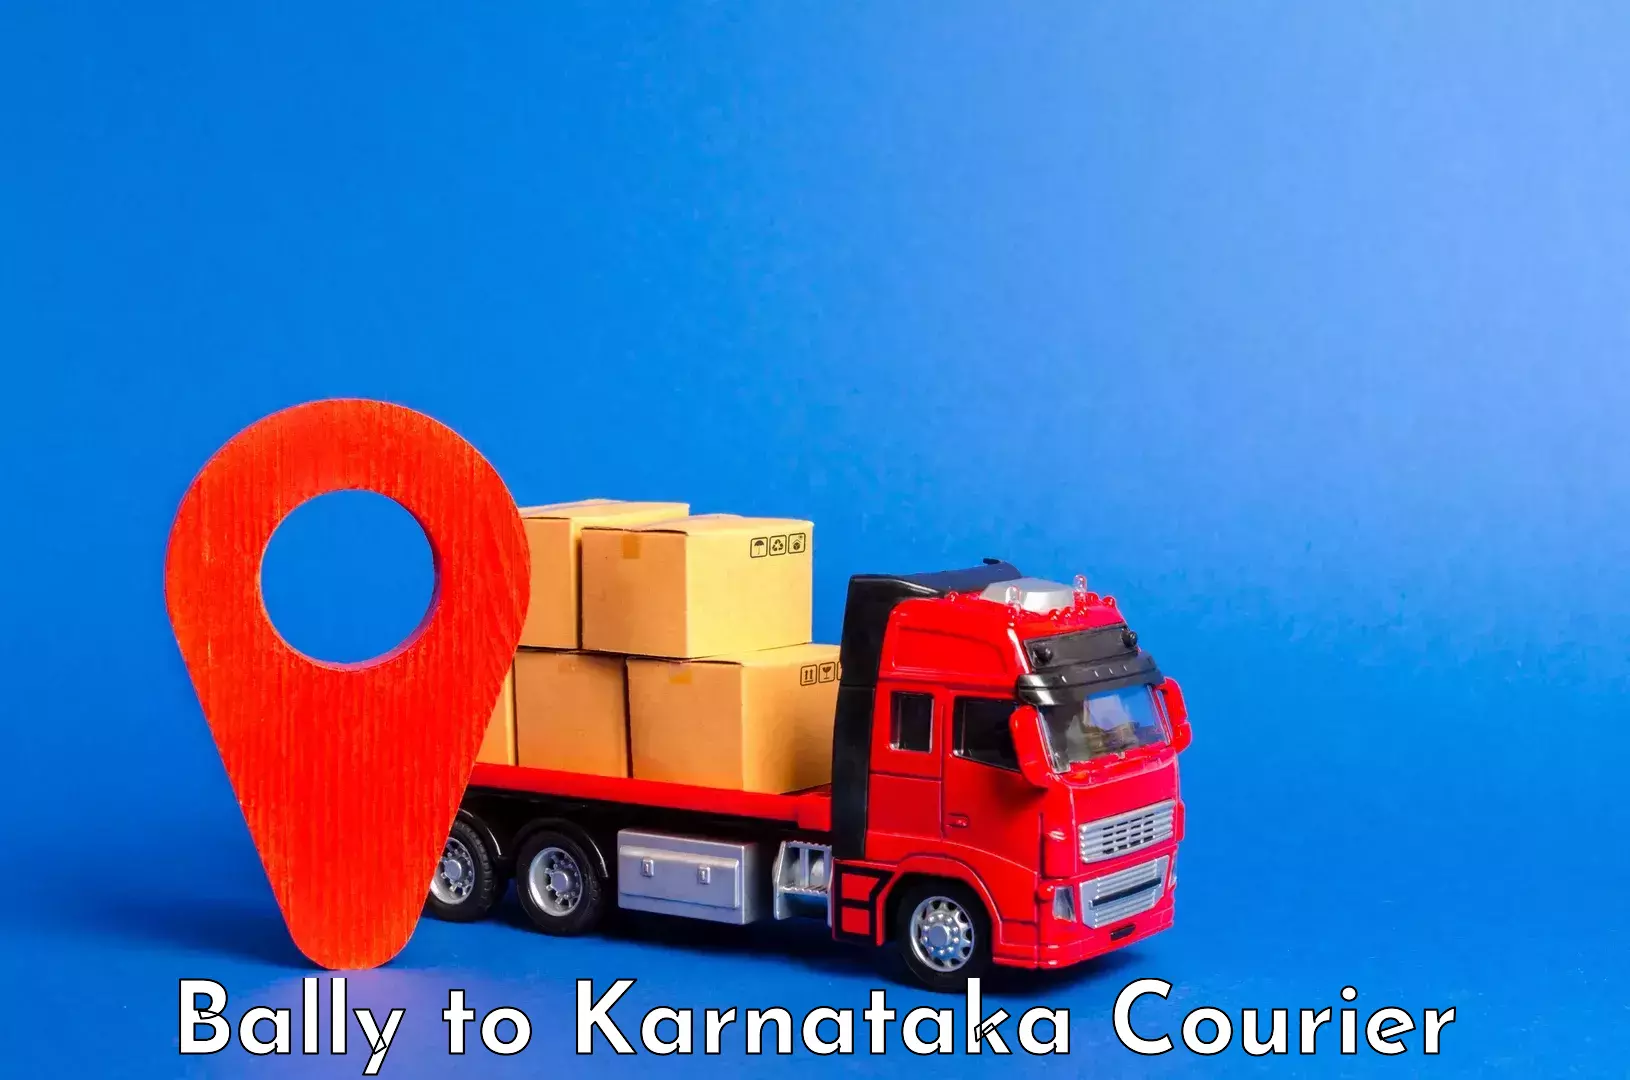 Professional baggage delivery in Bally to Mangalore Port